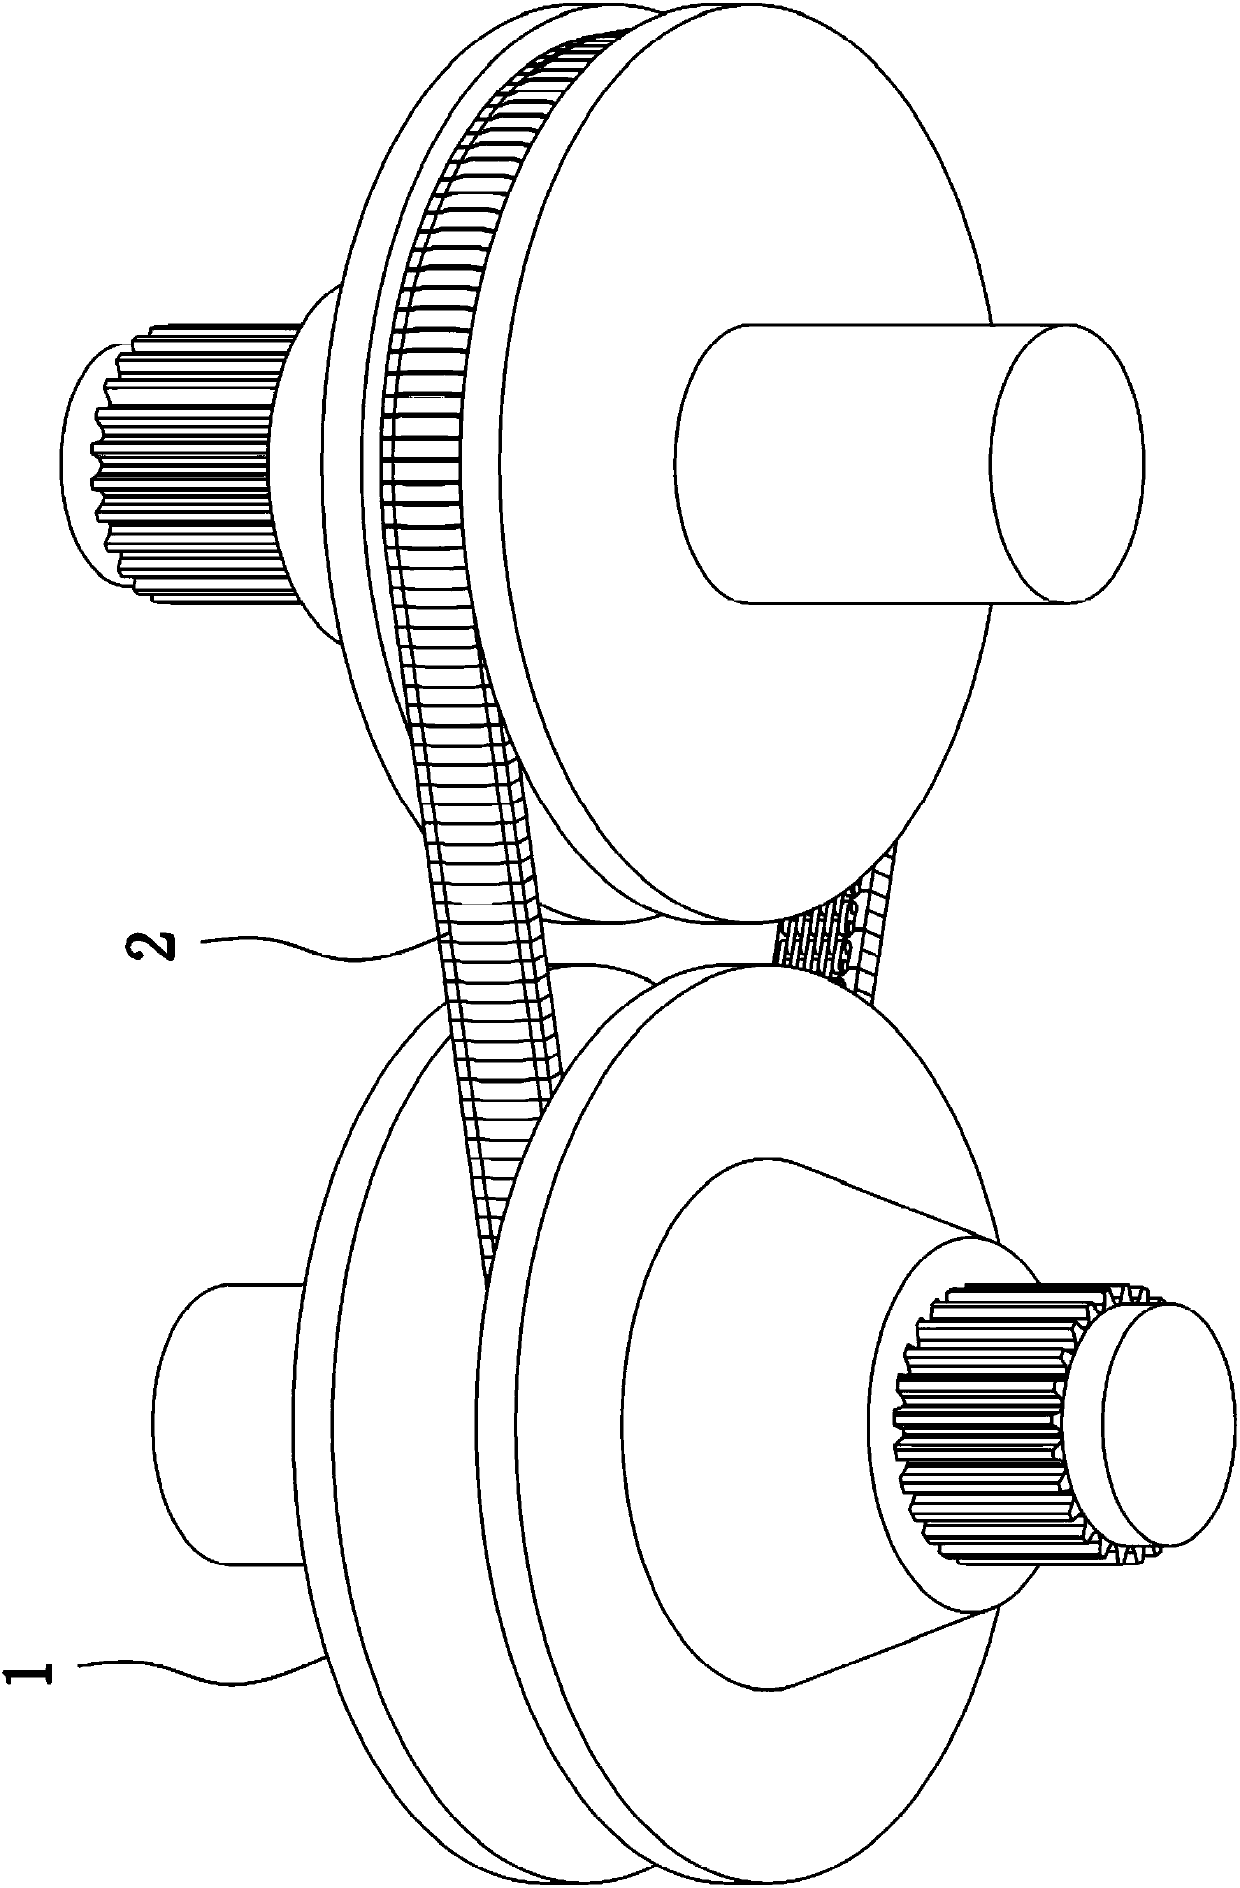 Continuously variable transmission driving chain composited with push blocks